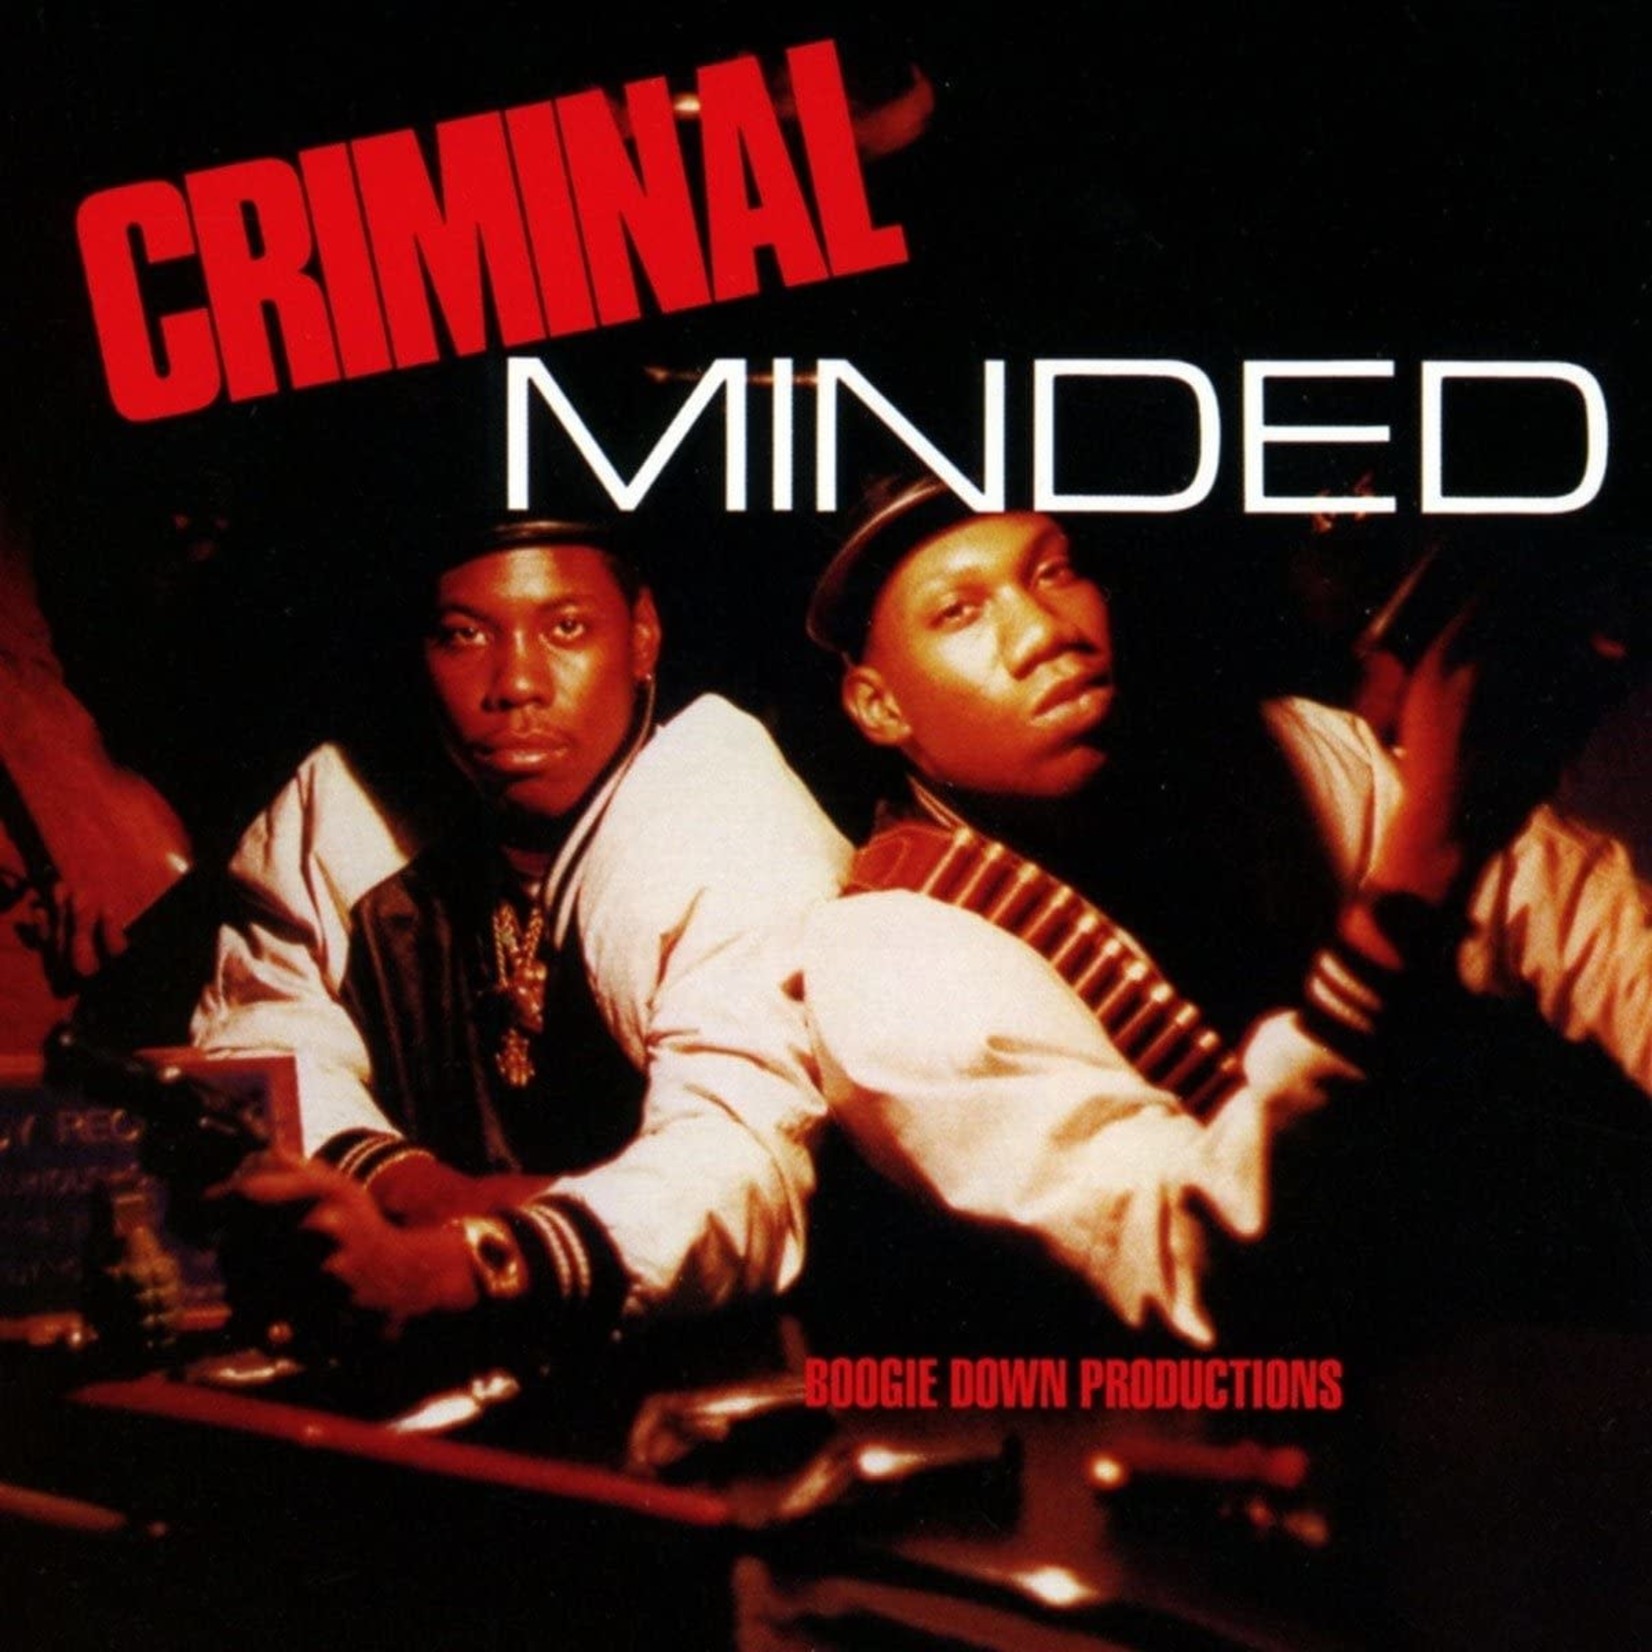 [New] Boogie Down Productions: Criminal Minded (limited metallic & silver vinyl) [B-BOY]